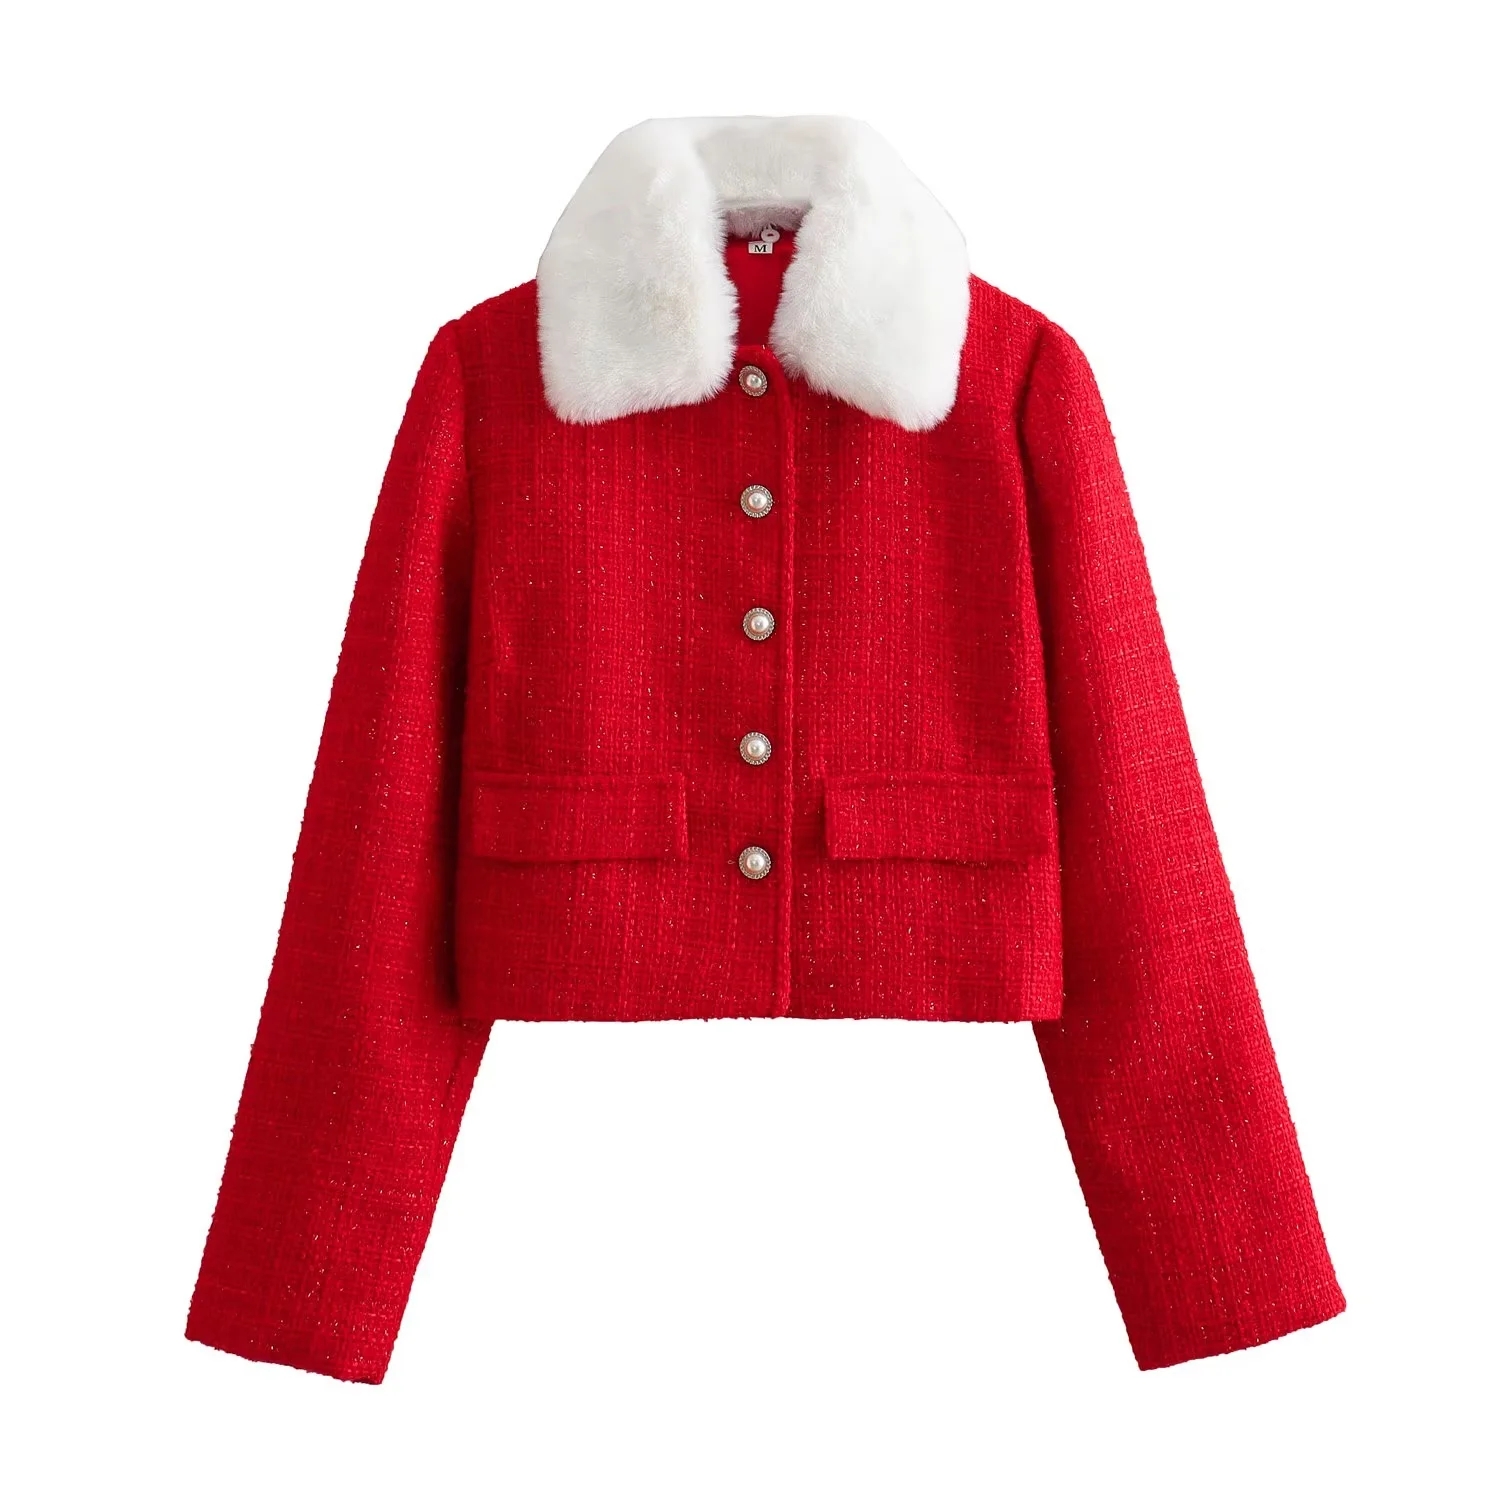 Fashion Red Woolen Collared Buttoned Jacket,Coat-Jacket